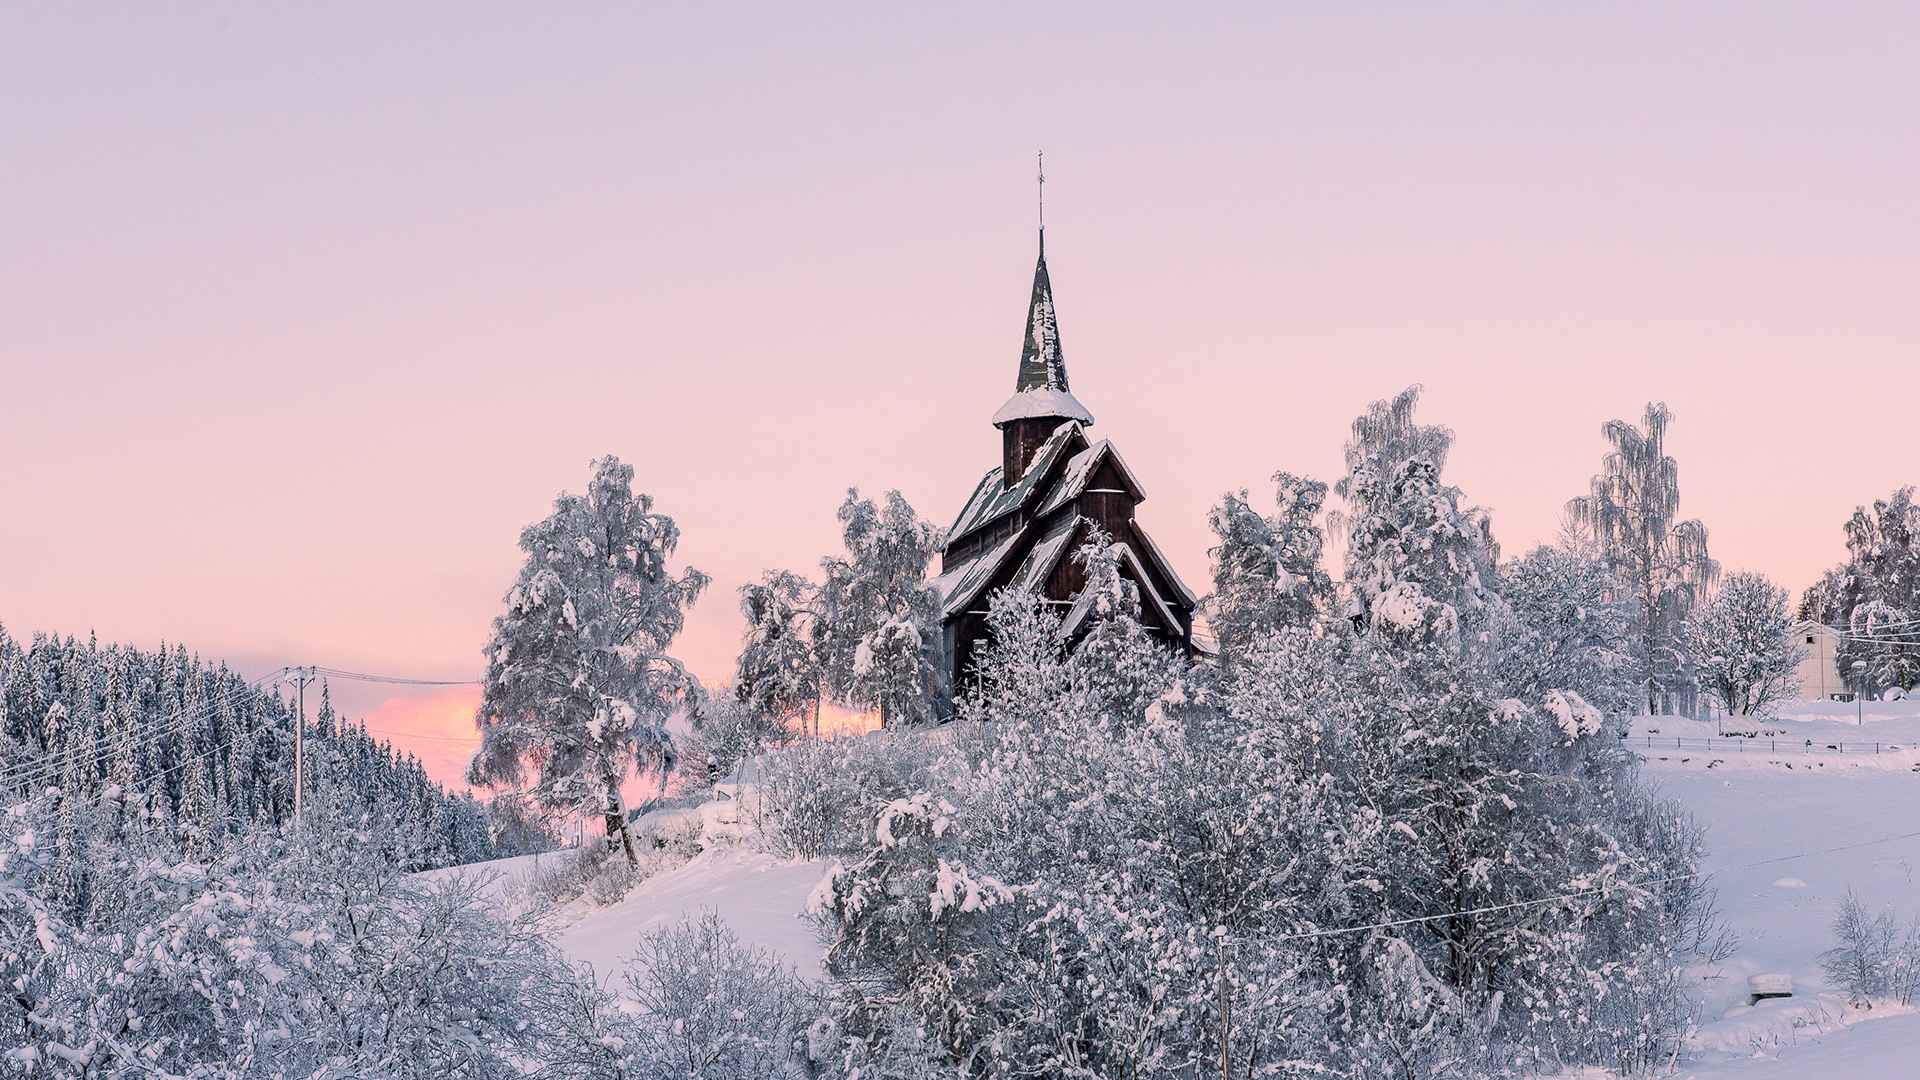 The stave church of Høre covered in snow at sunset on a winter day.